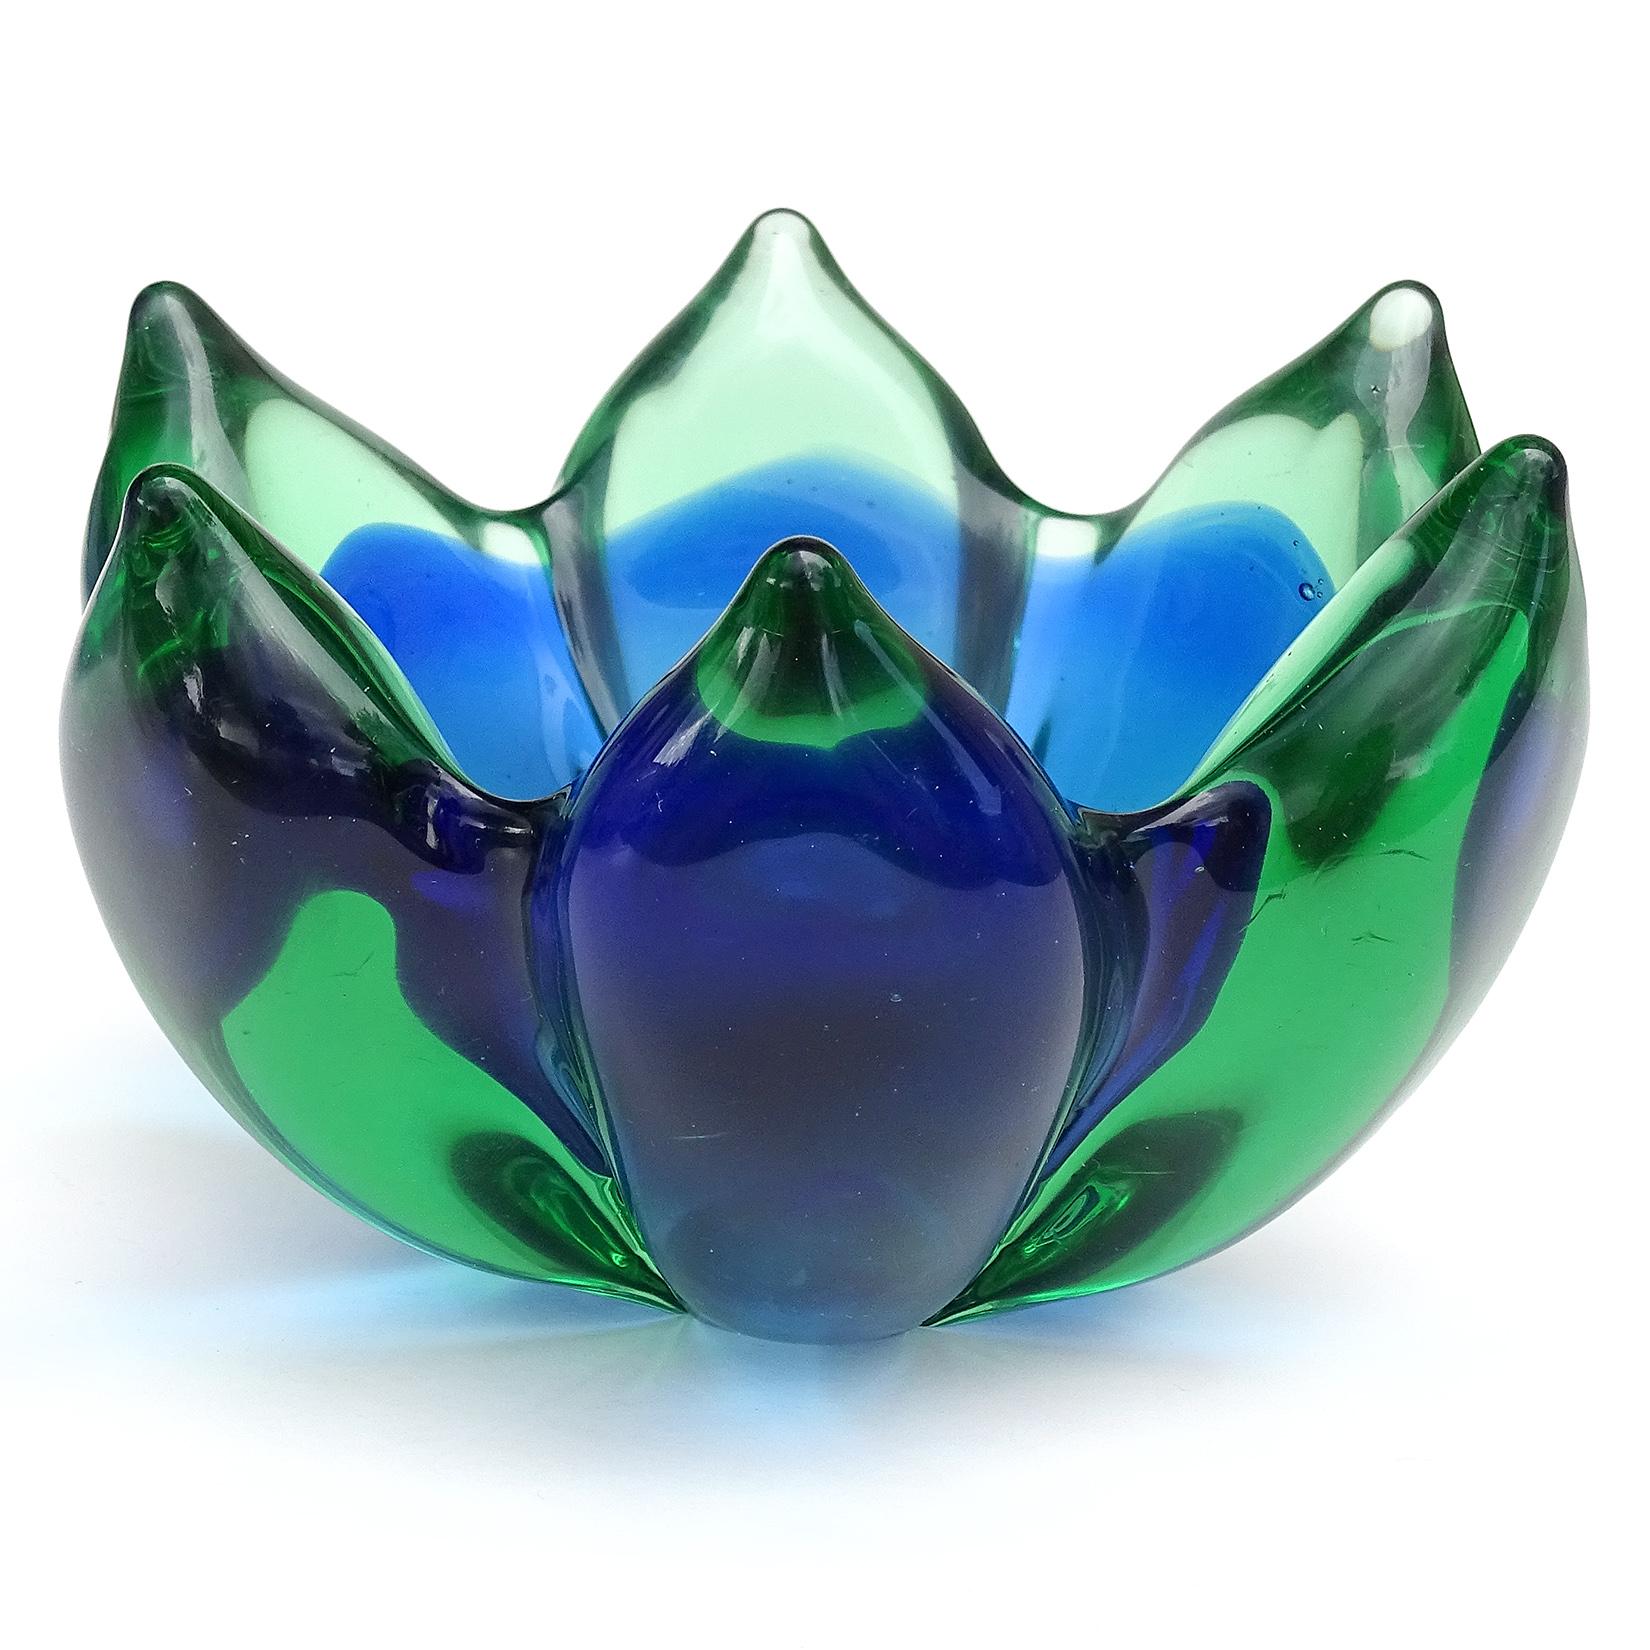 Beautiful vintage Murano hand blown Sommerso green and blue glass Italian art glass Lotus flower shaped bowl, vide-poche. Documented to designer Archimede Seguso. This one does not have a label, but I have owned several others with the Murano